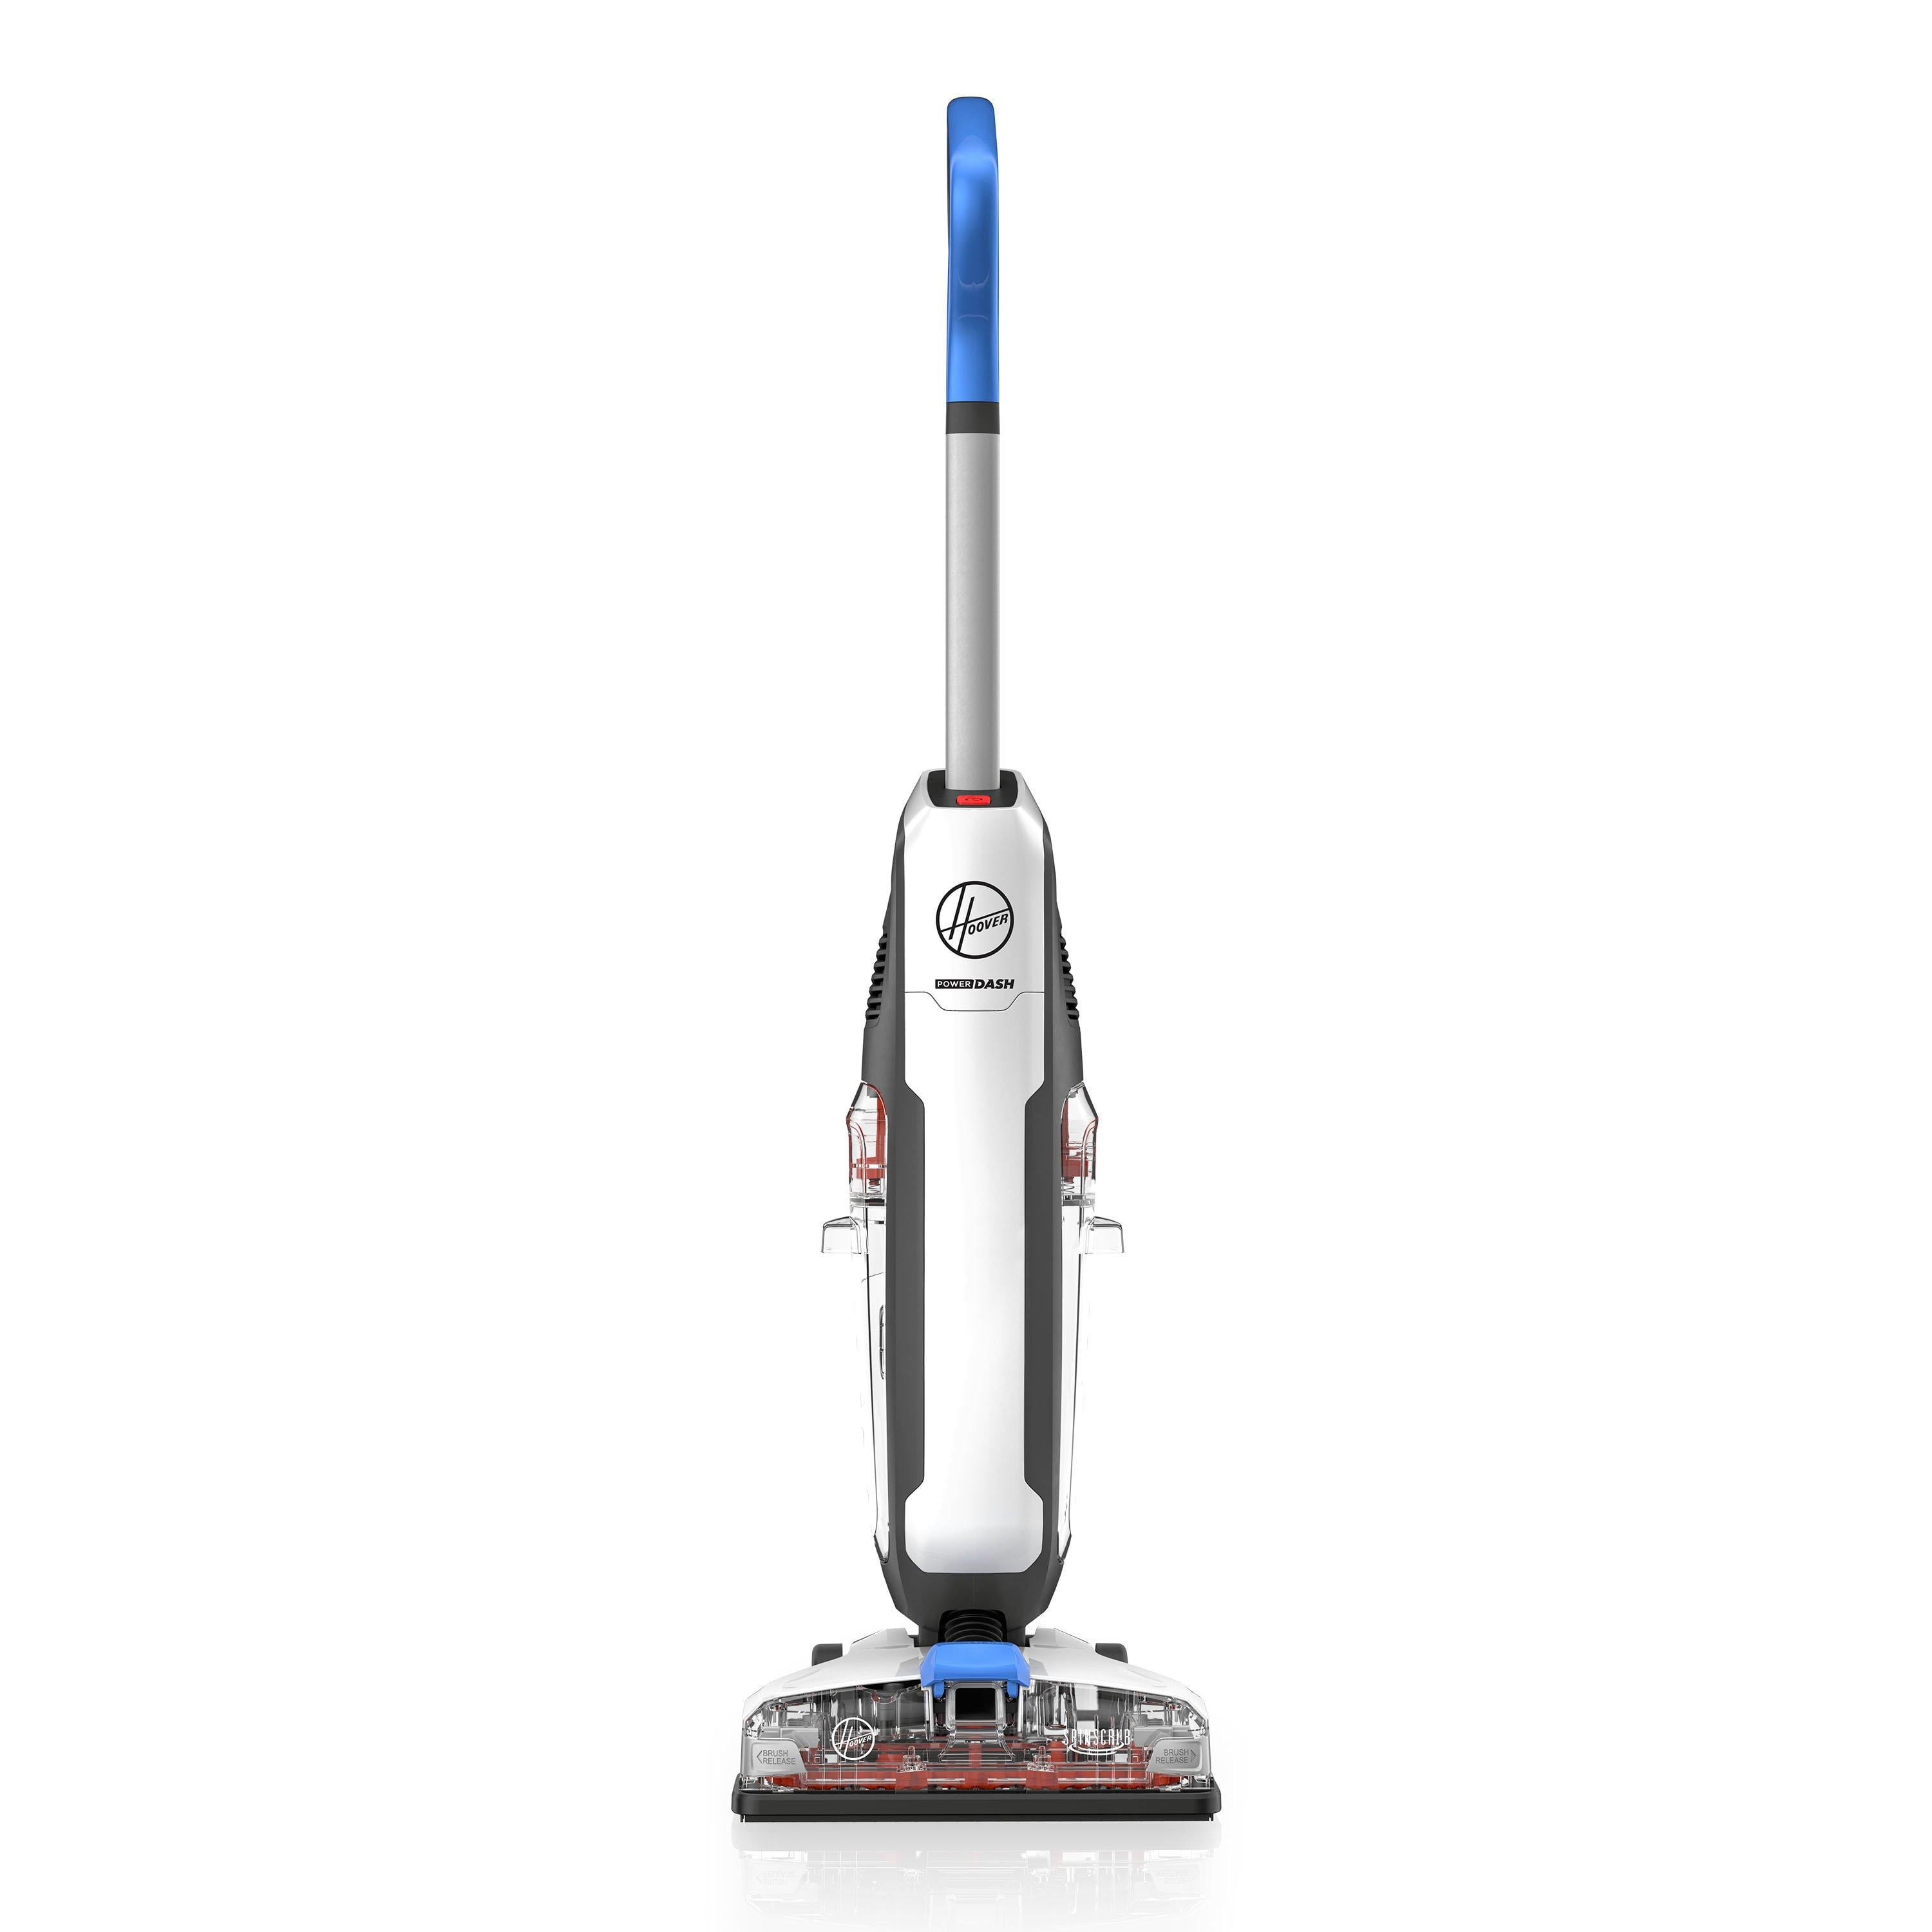 Hoover PowerDash Hard Floor Cleaner (FH41010) $59 + Free Shipping